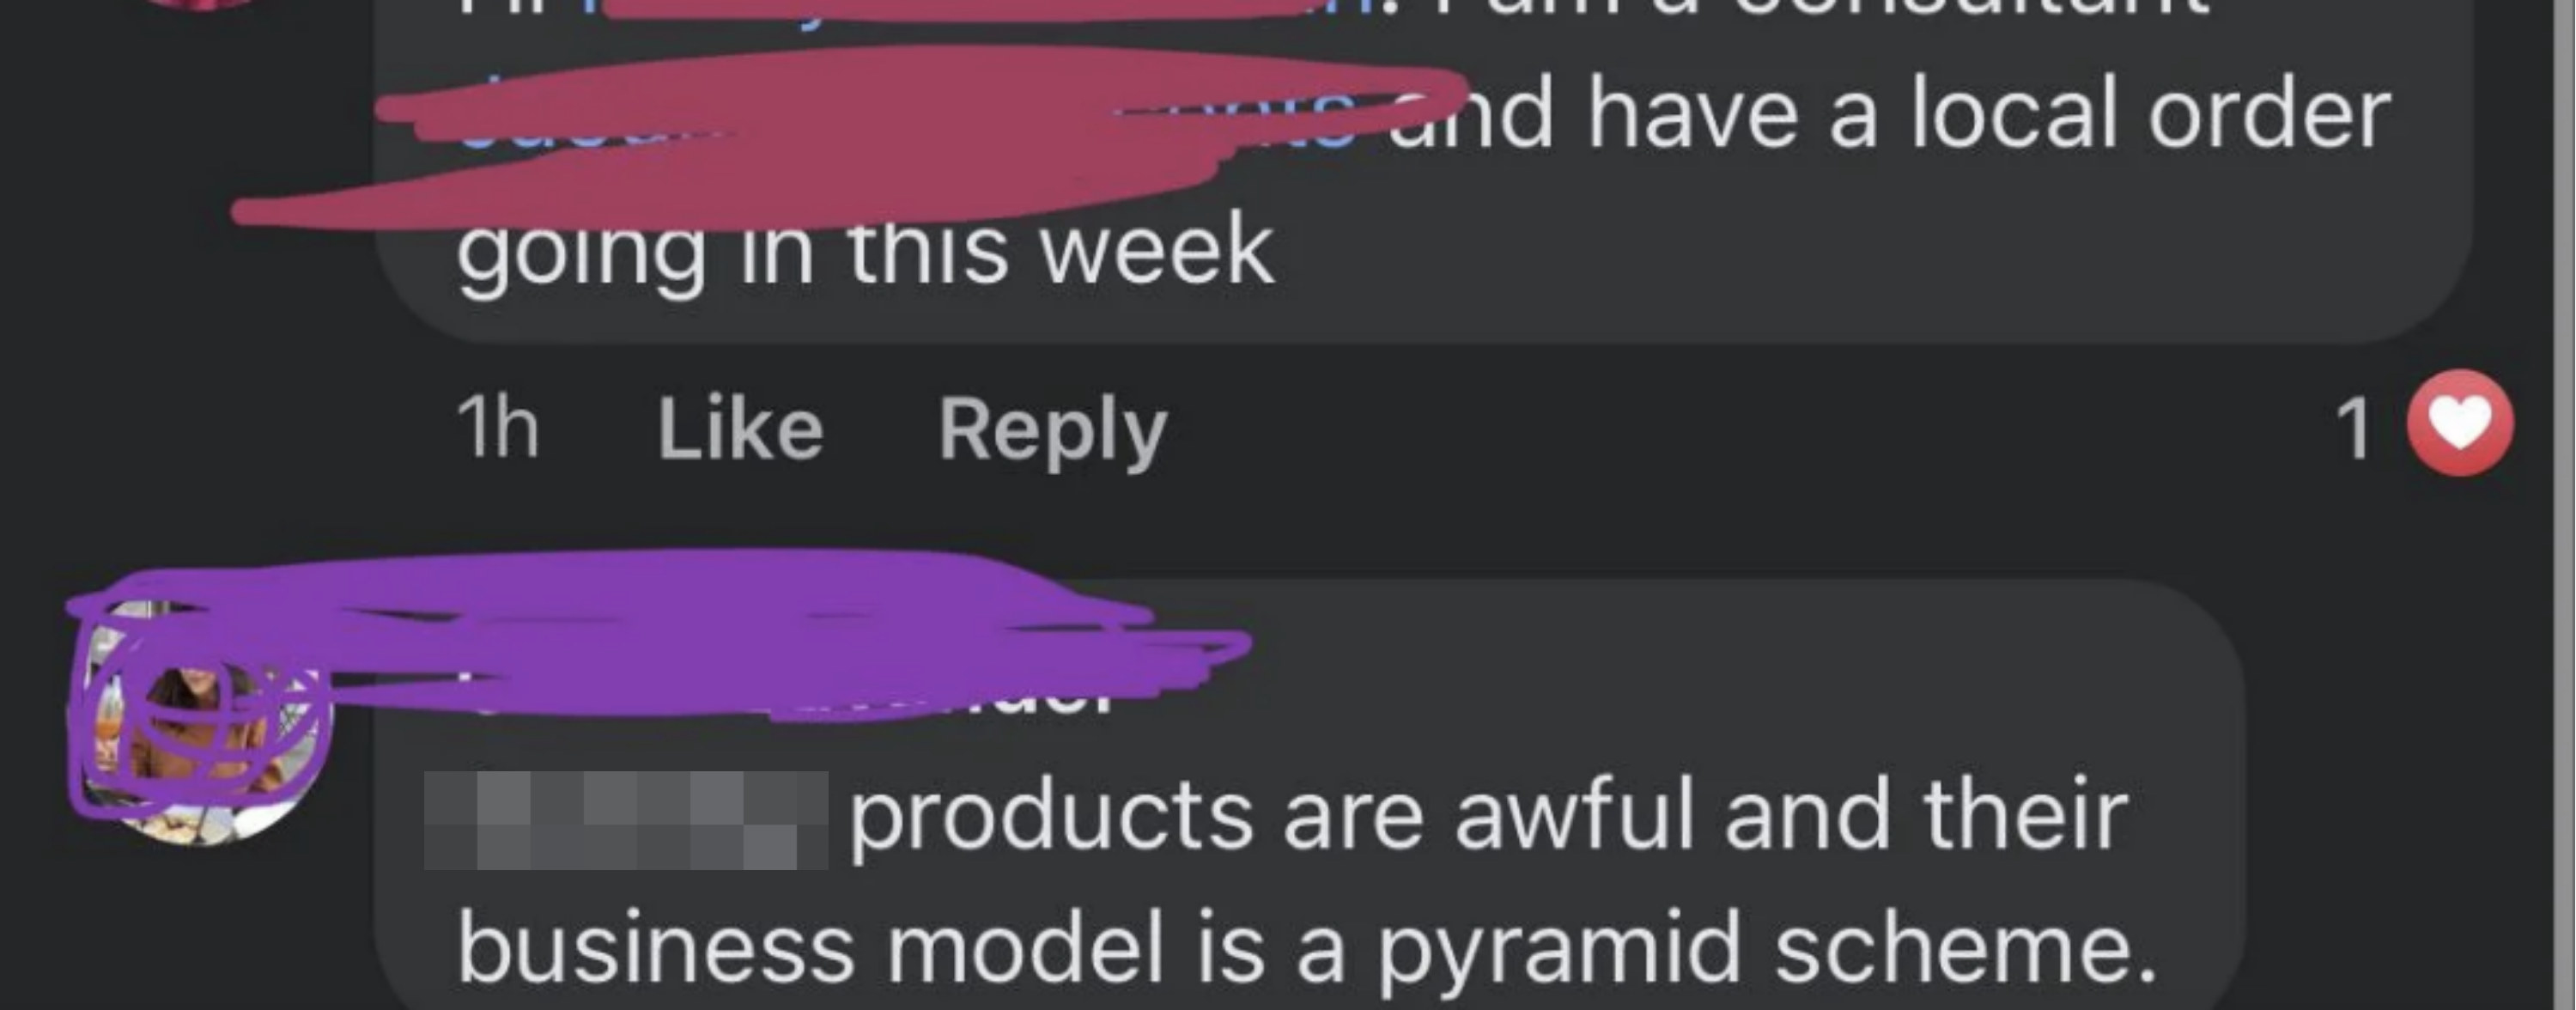 &quot;products are awful and their business model is a pyramid scheme.&quot;